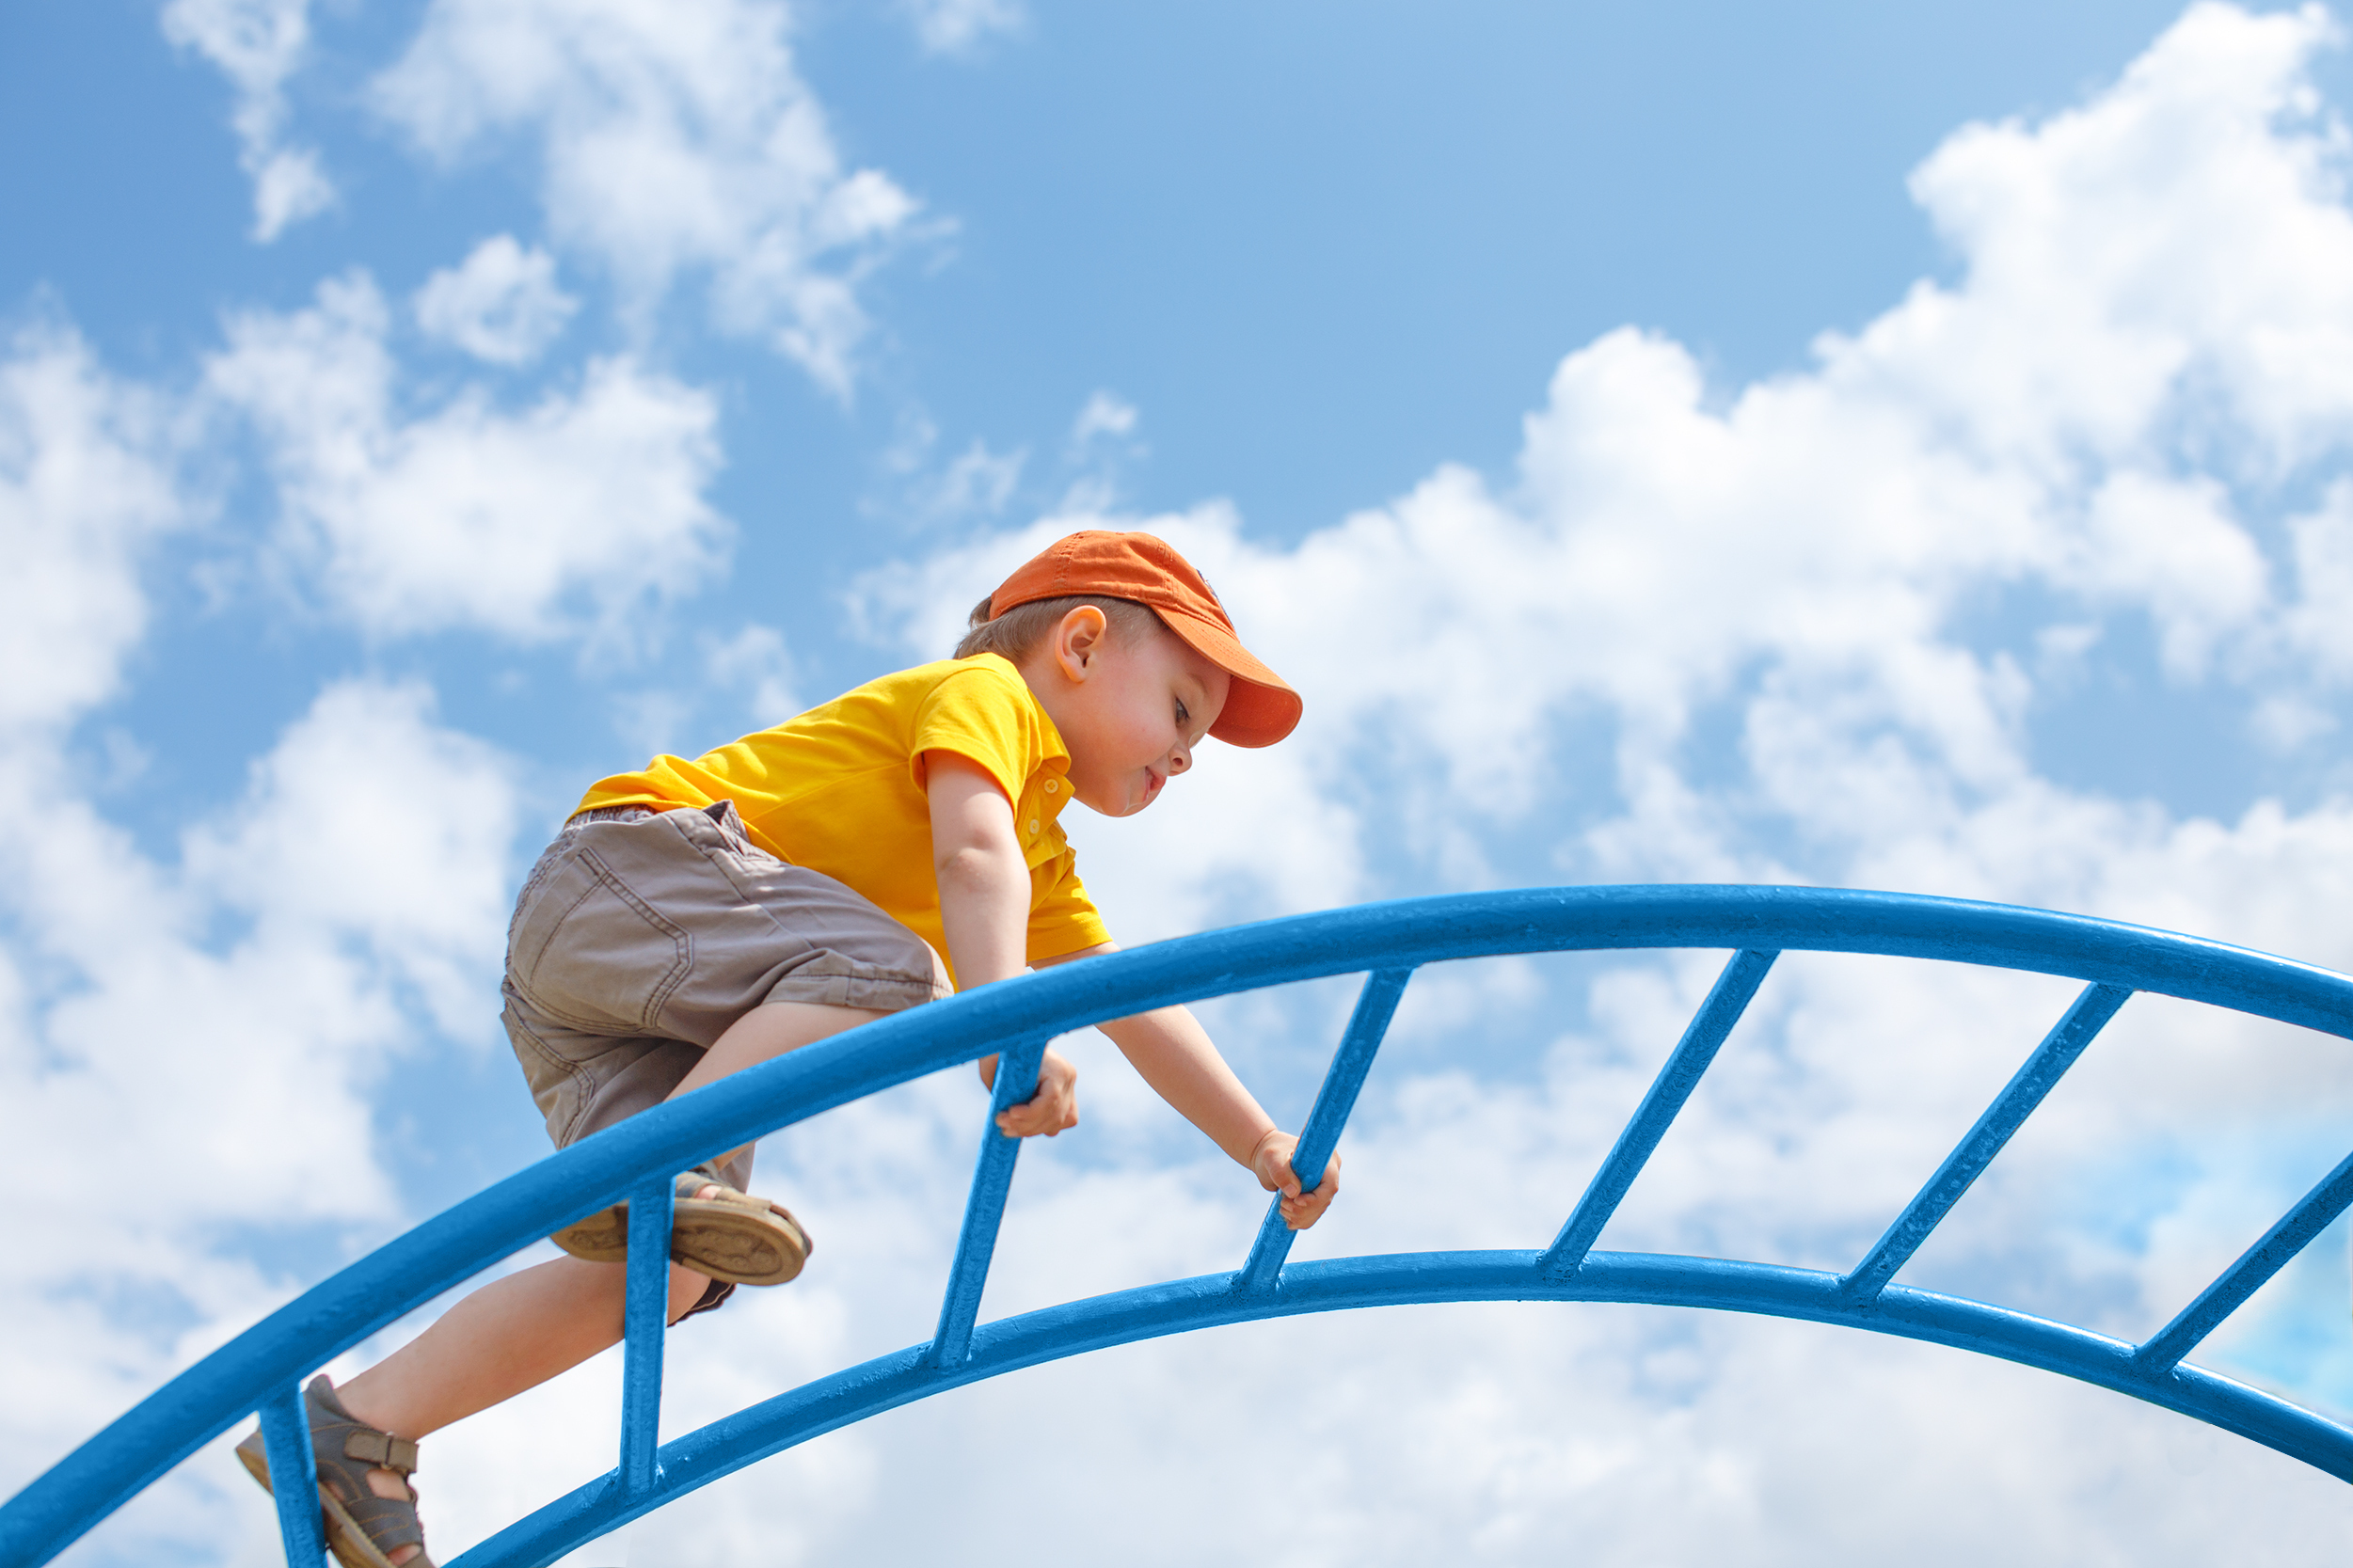 Child climbing on a play frame. Image coutresy of EvgeniiAnd via Shutterstock